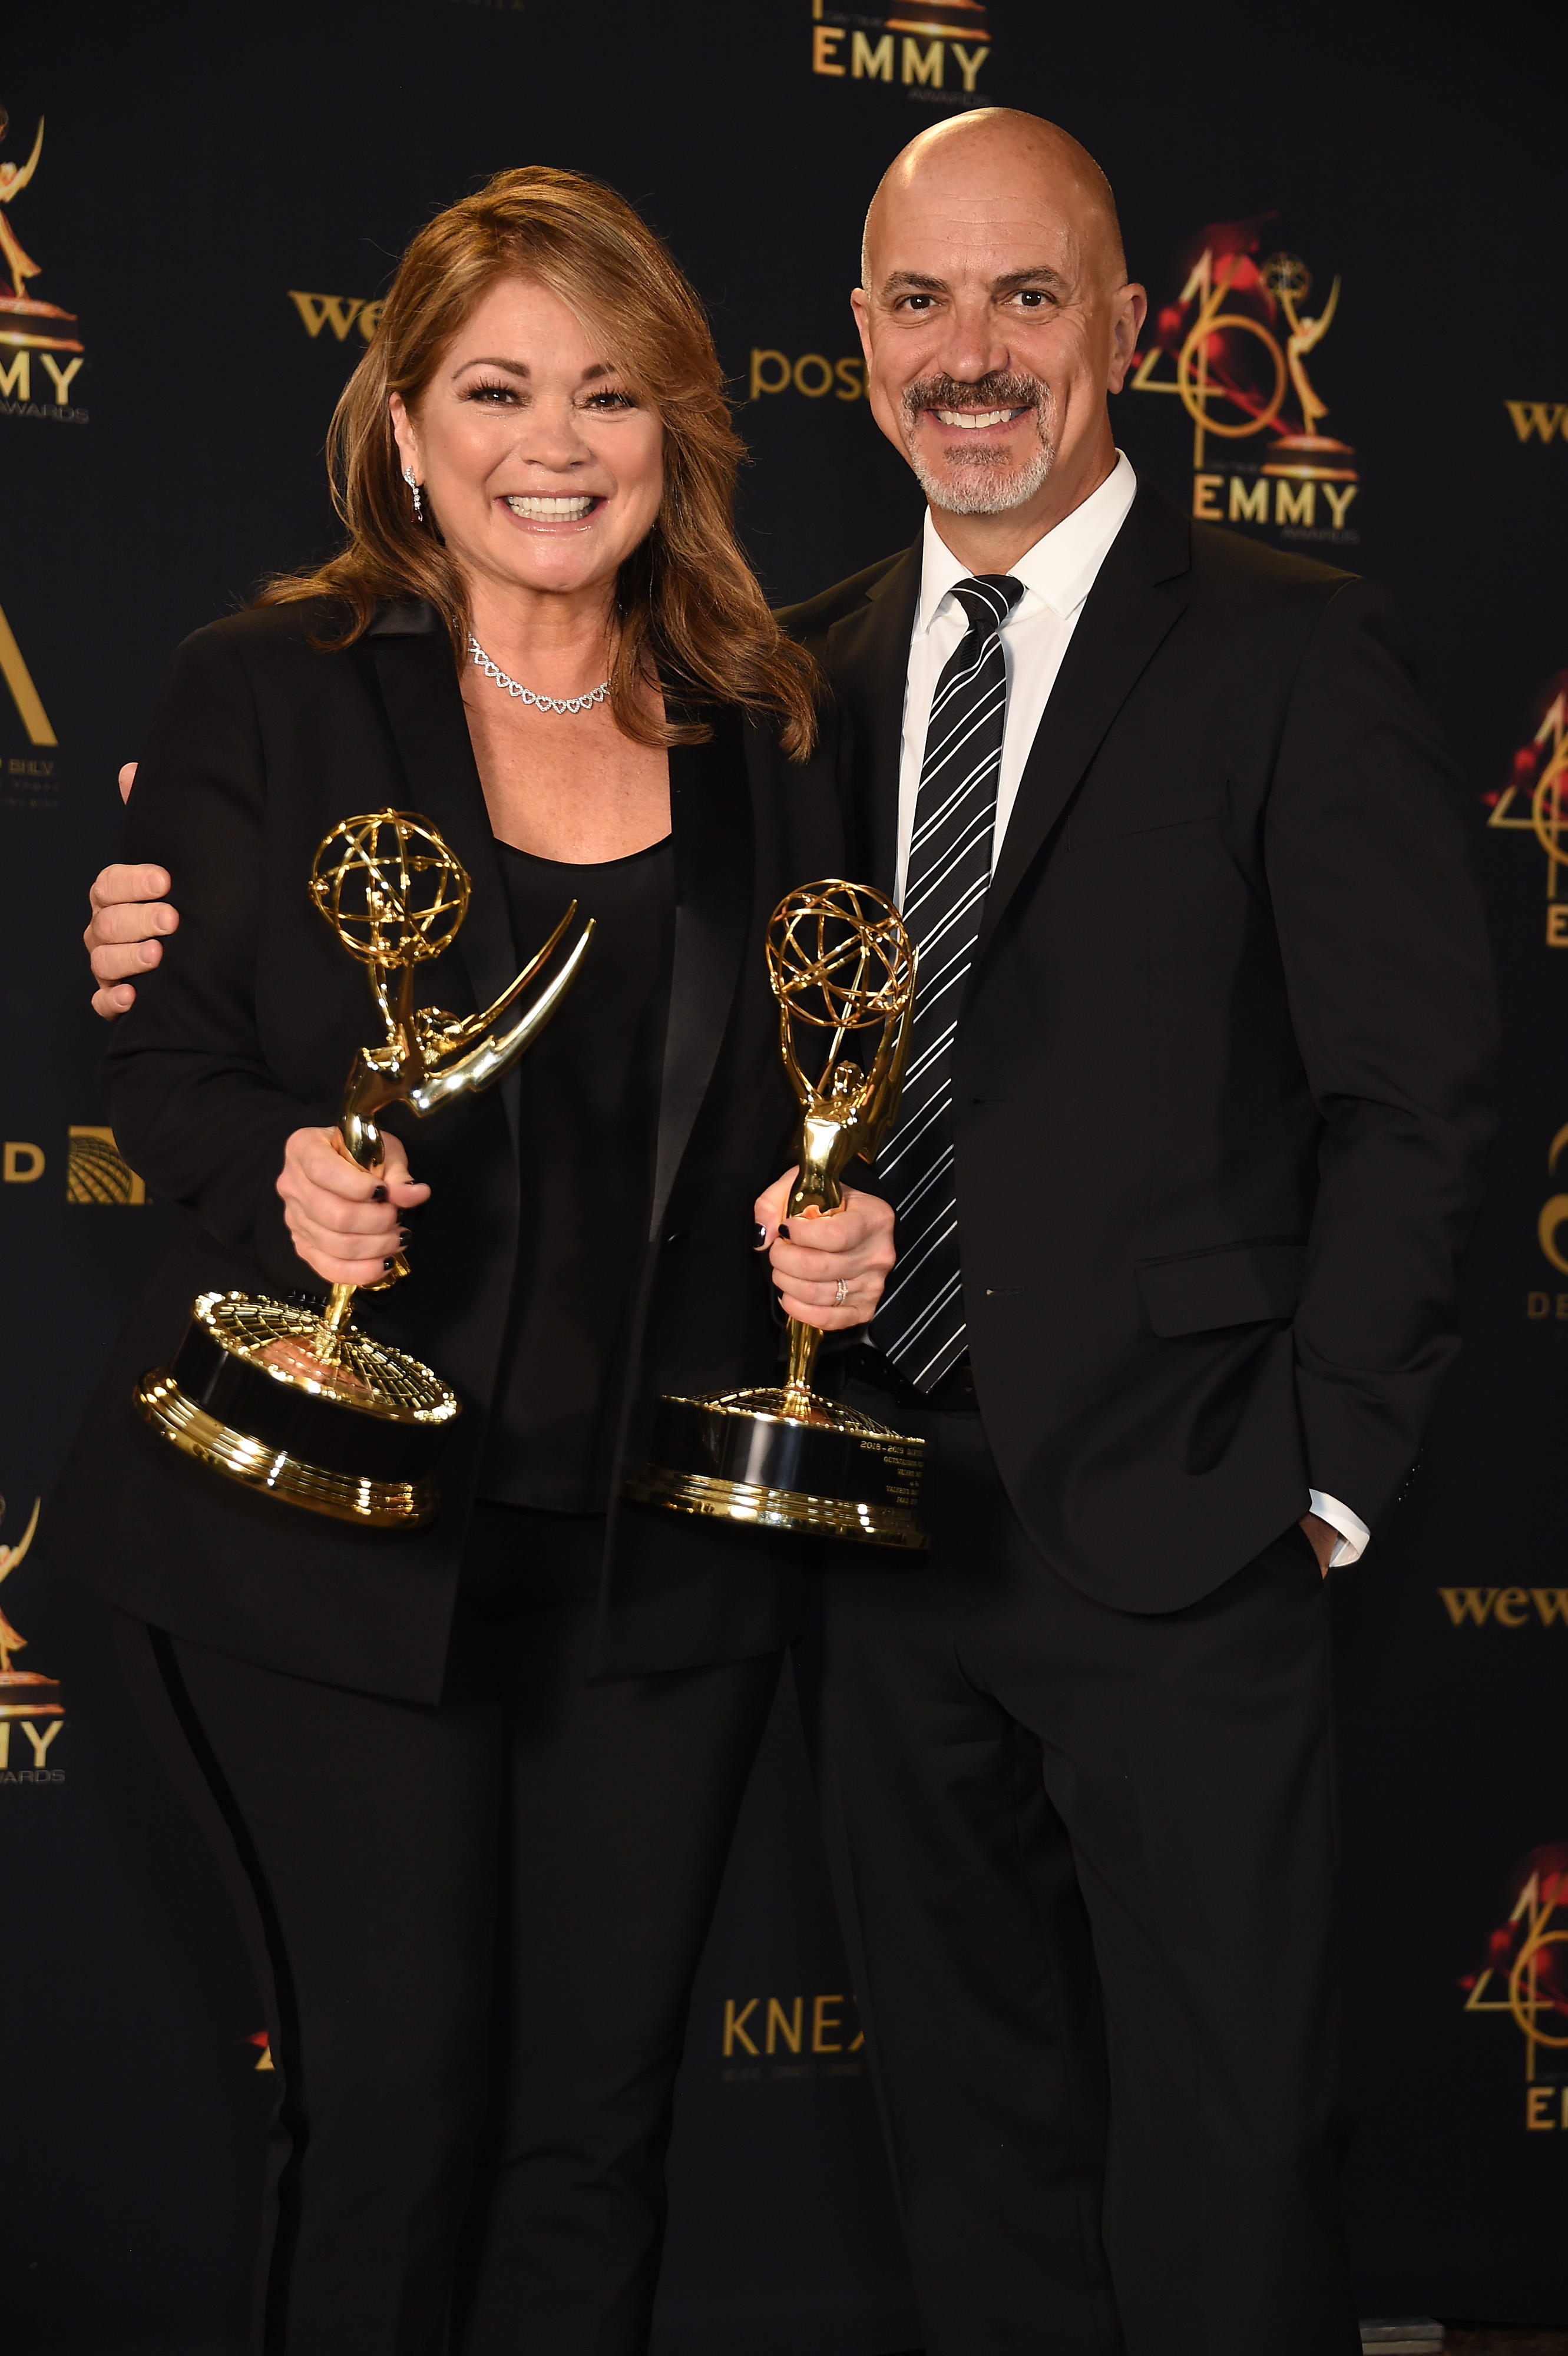 Valerie Bertinelli and then-husand Tom Vitale attend the 46th annual Daytime Emmy Awards at Pasadena Civic Center on May 05, 2019 | Source: Getty Images